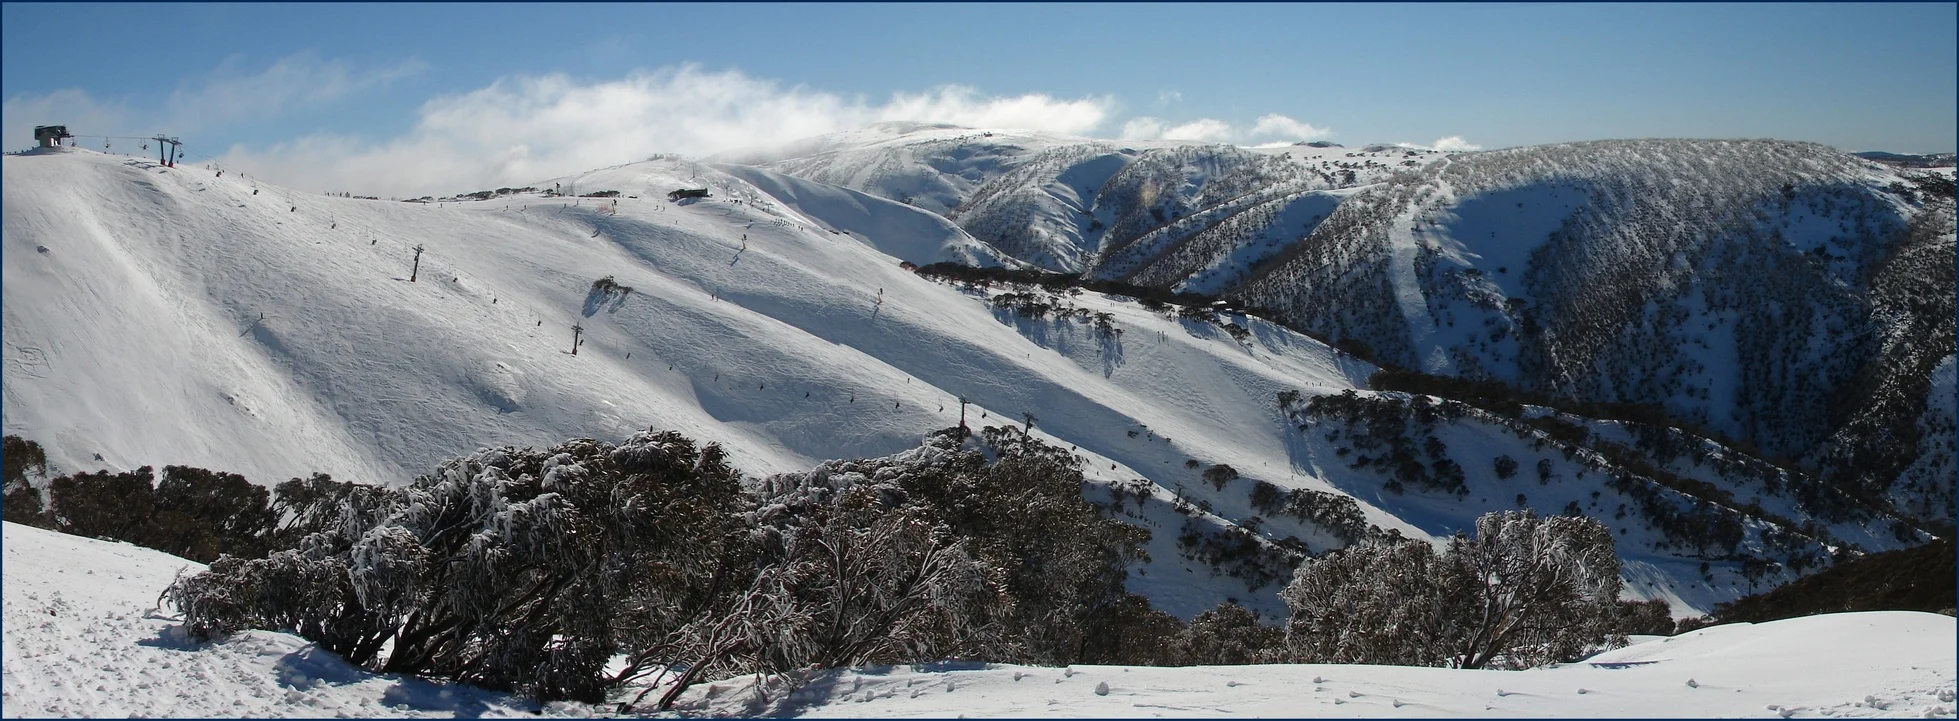 Mount Hotham covered in snow with busy ski slopes.